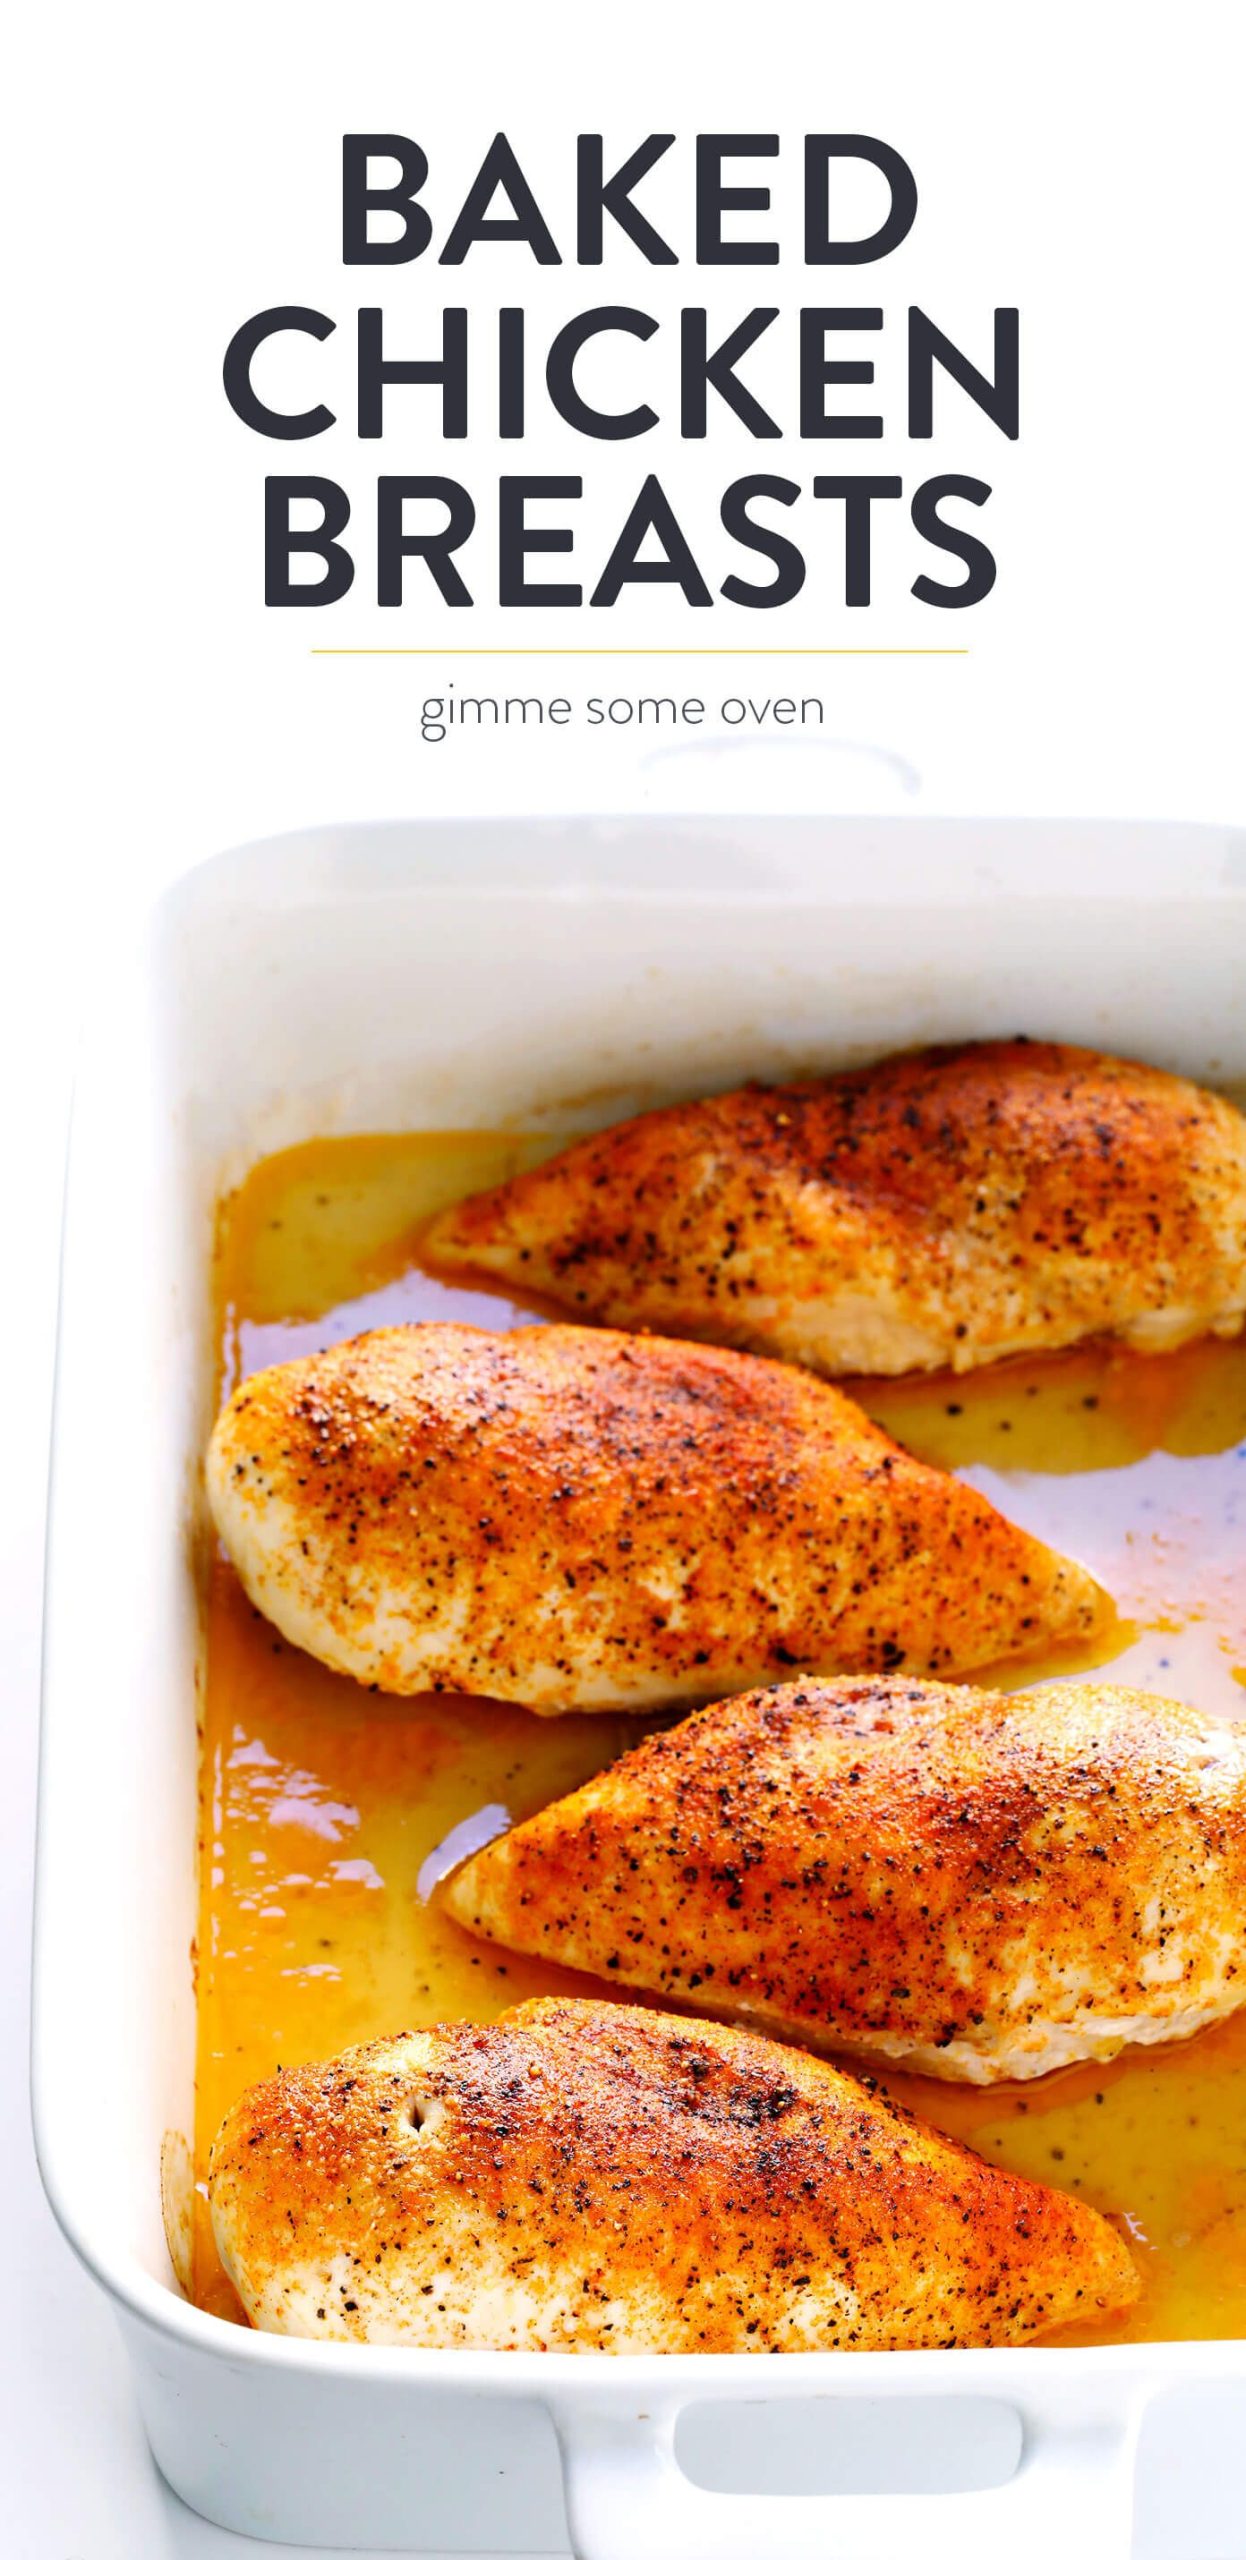 Baked Chicken Breast Lunch Recipes